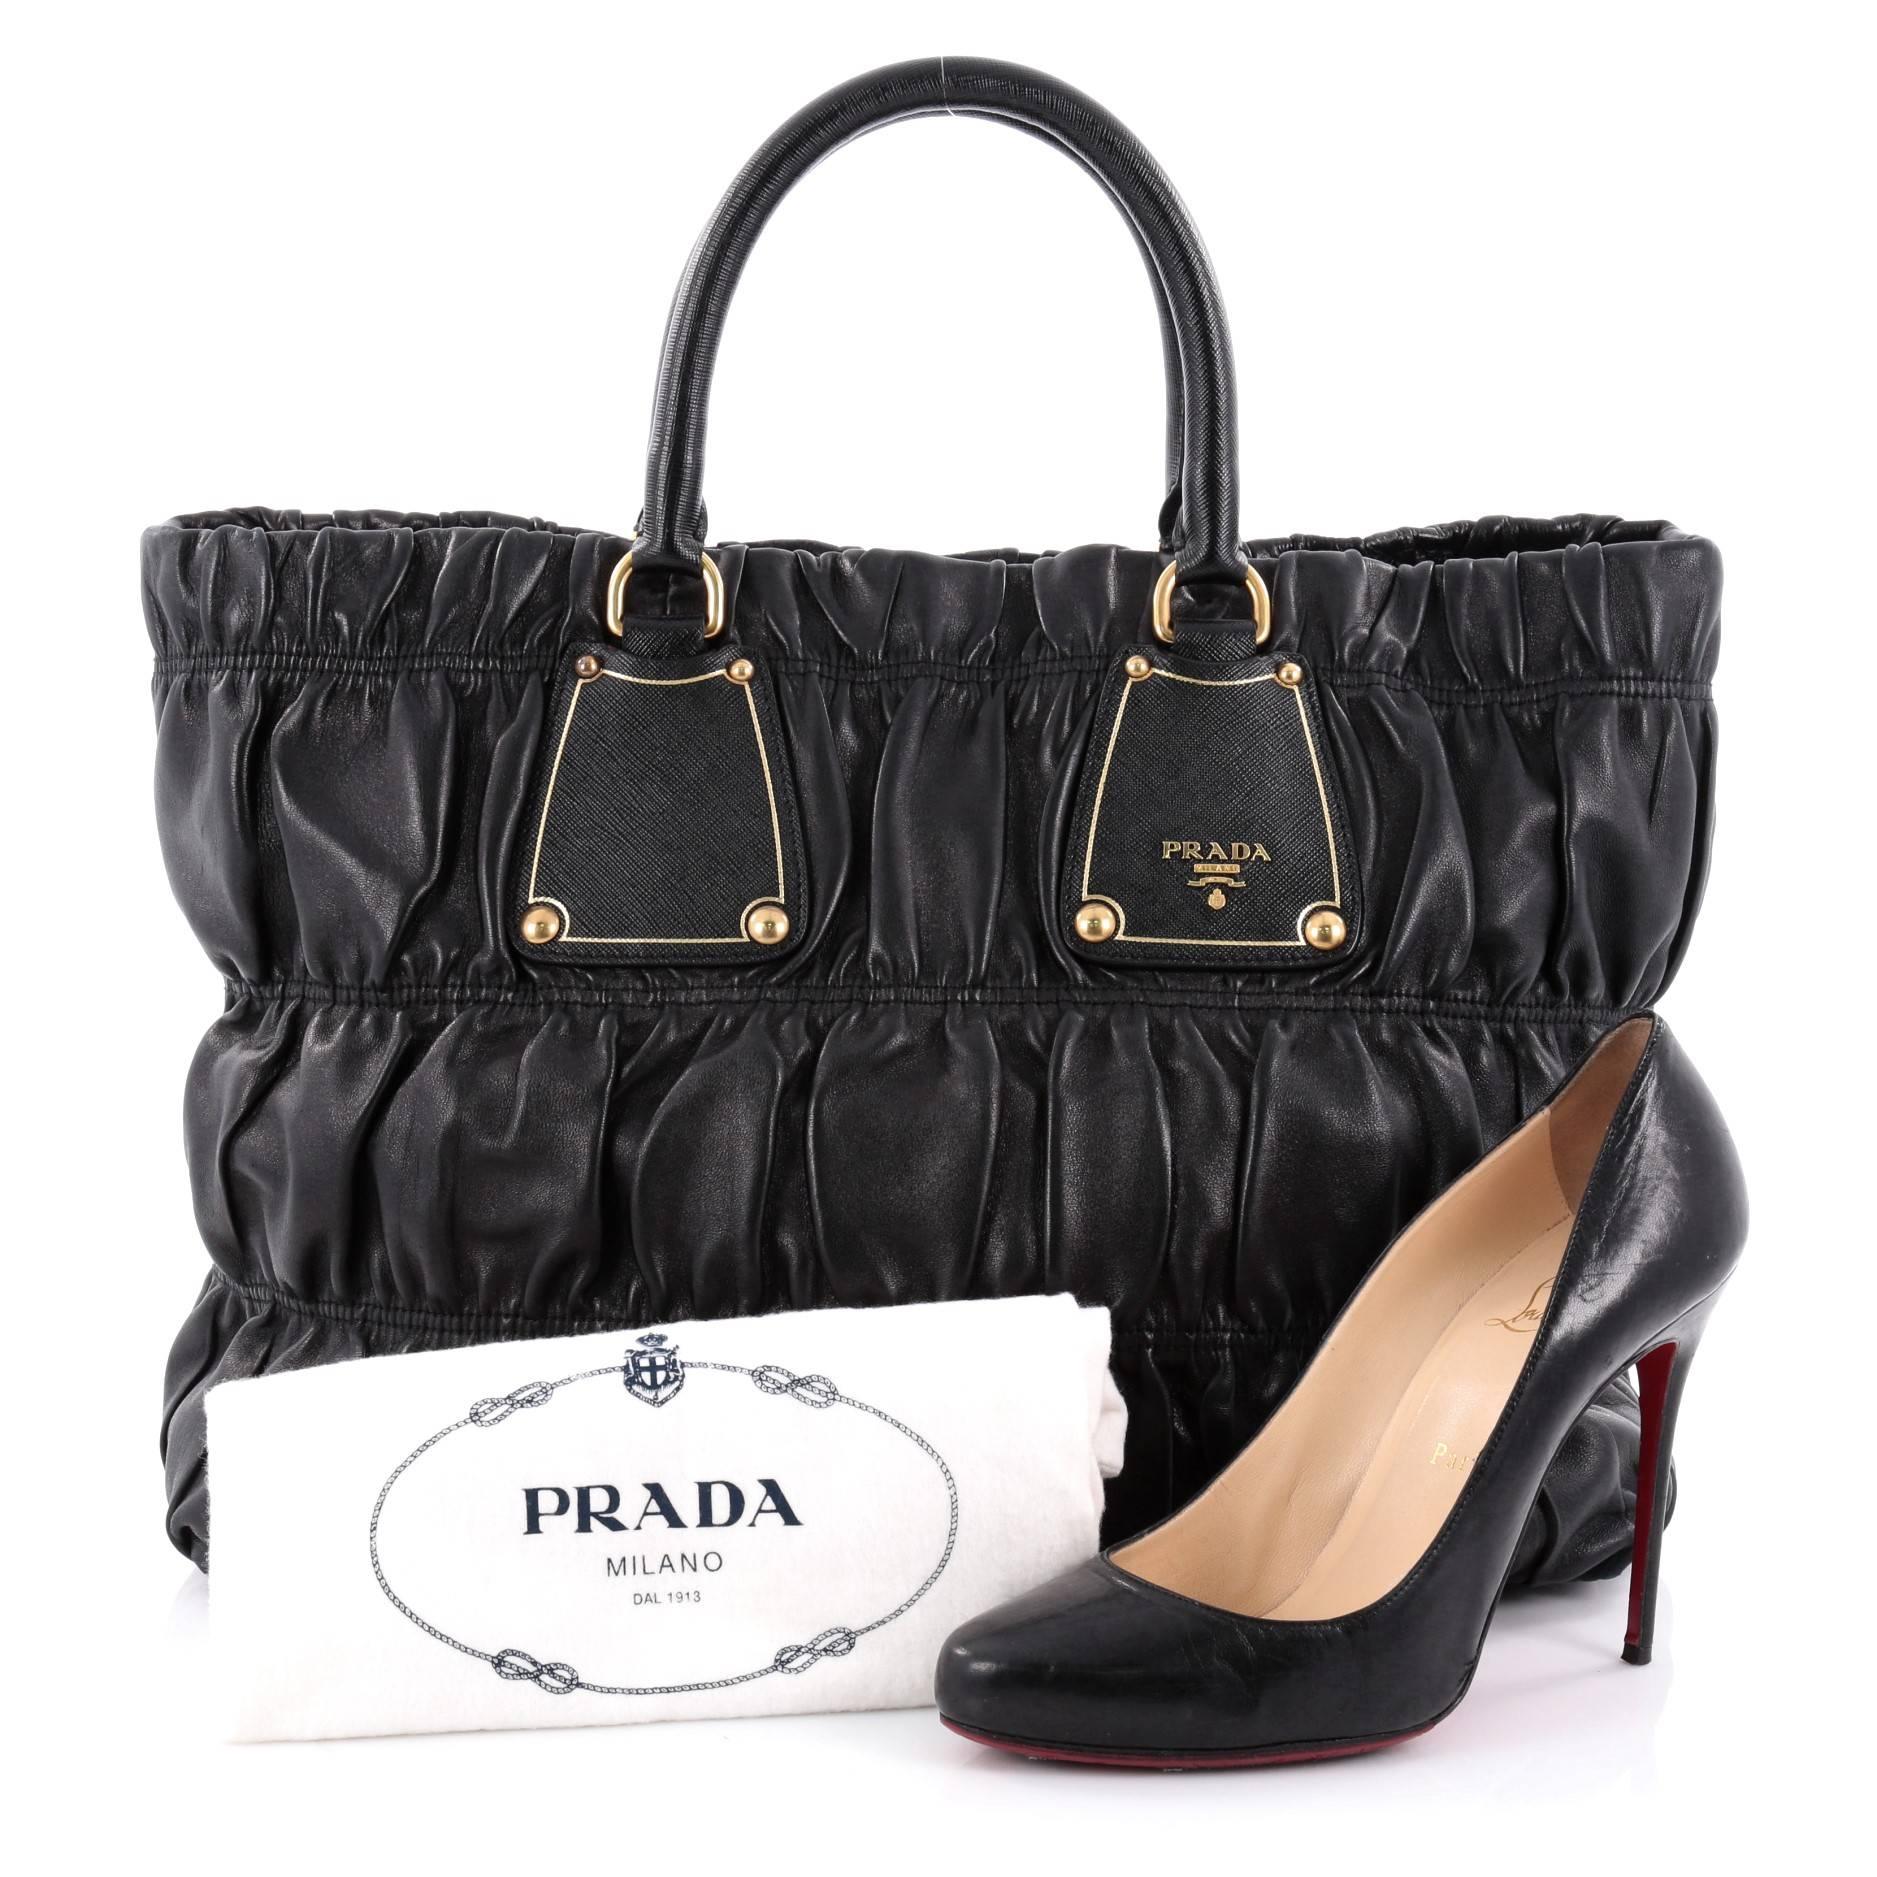 This authentic Prada Gaufre Tote Nappa Leather Large is a versatile contemporary chic day bag to have by your side perfect for your daily excursions. Crafted from pleated black nappa leather, this stylish bag features dual-rolled leather handles,